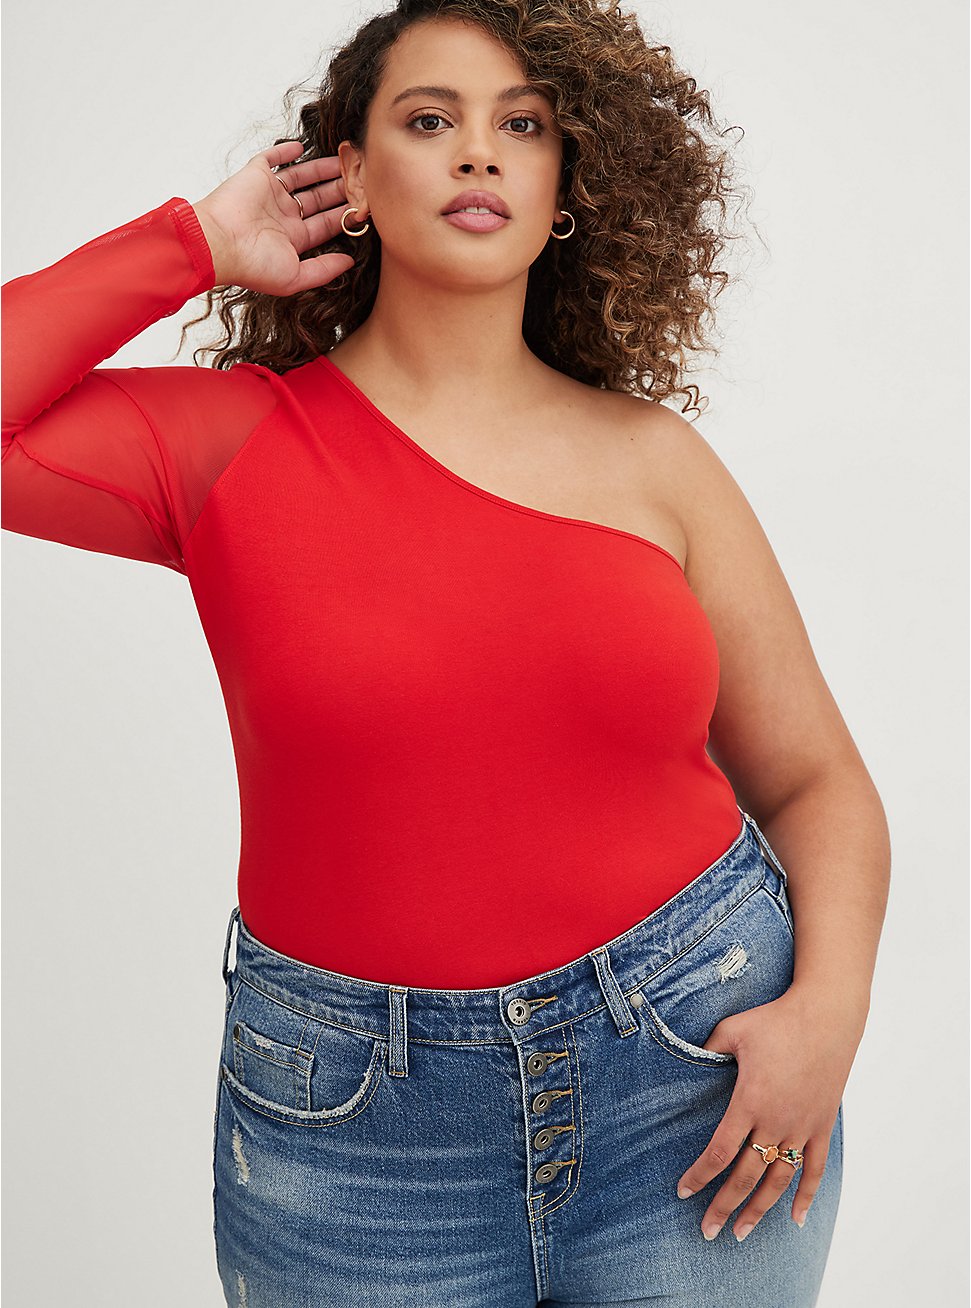 Plus Size One-Shoulder Top - Foxy & Mesh Red , RED, hi-res